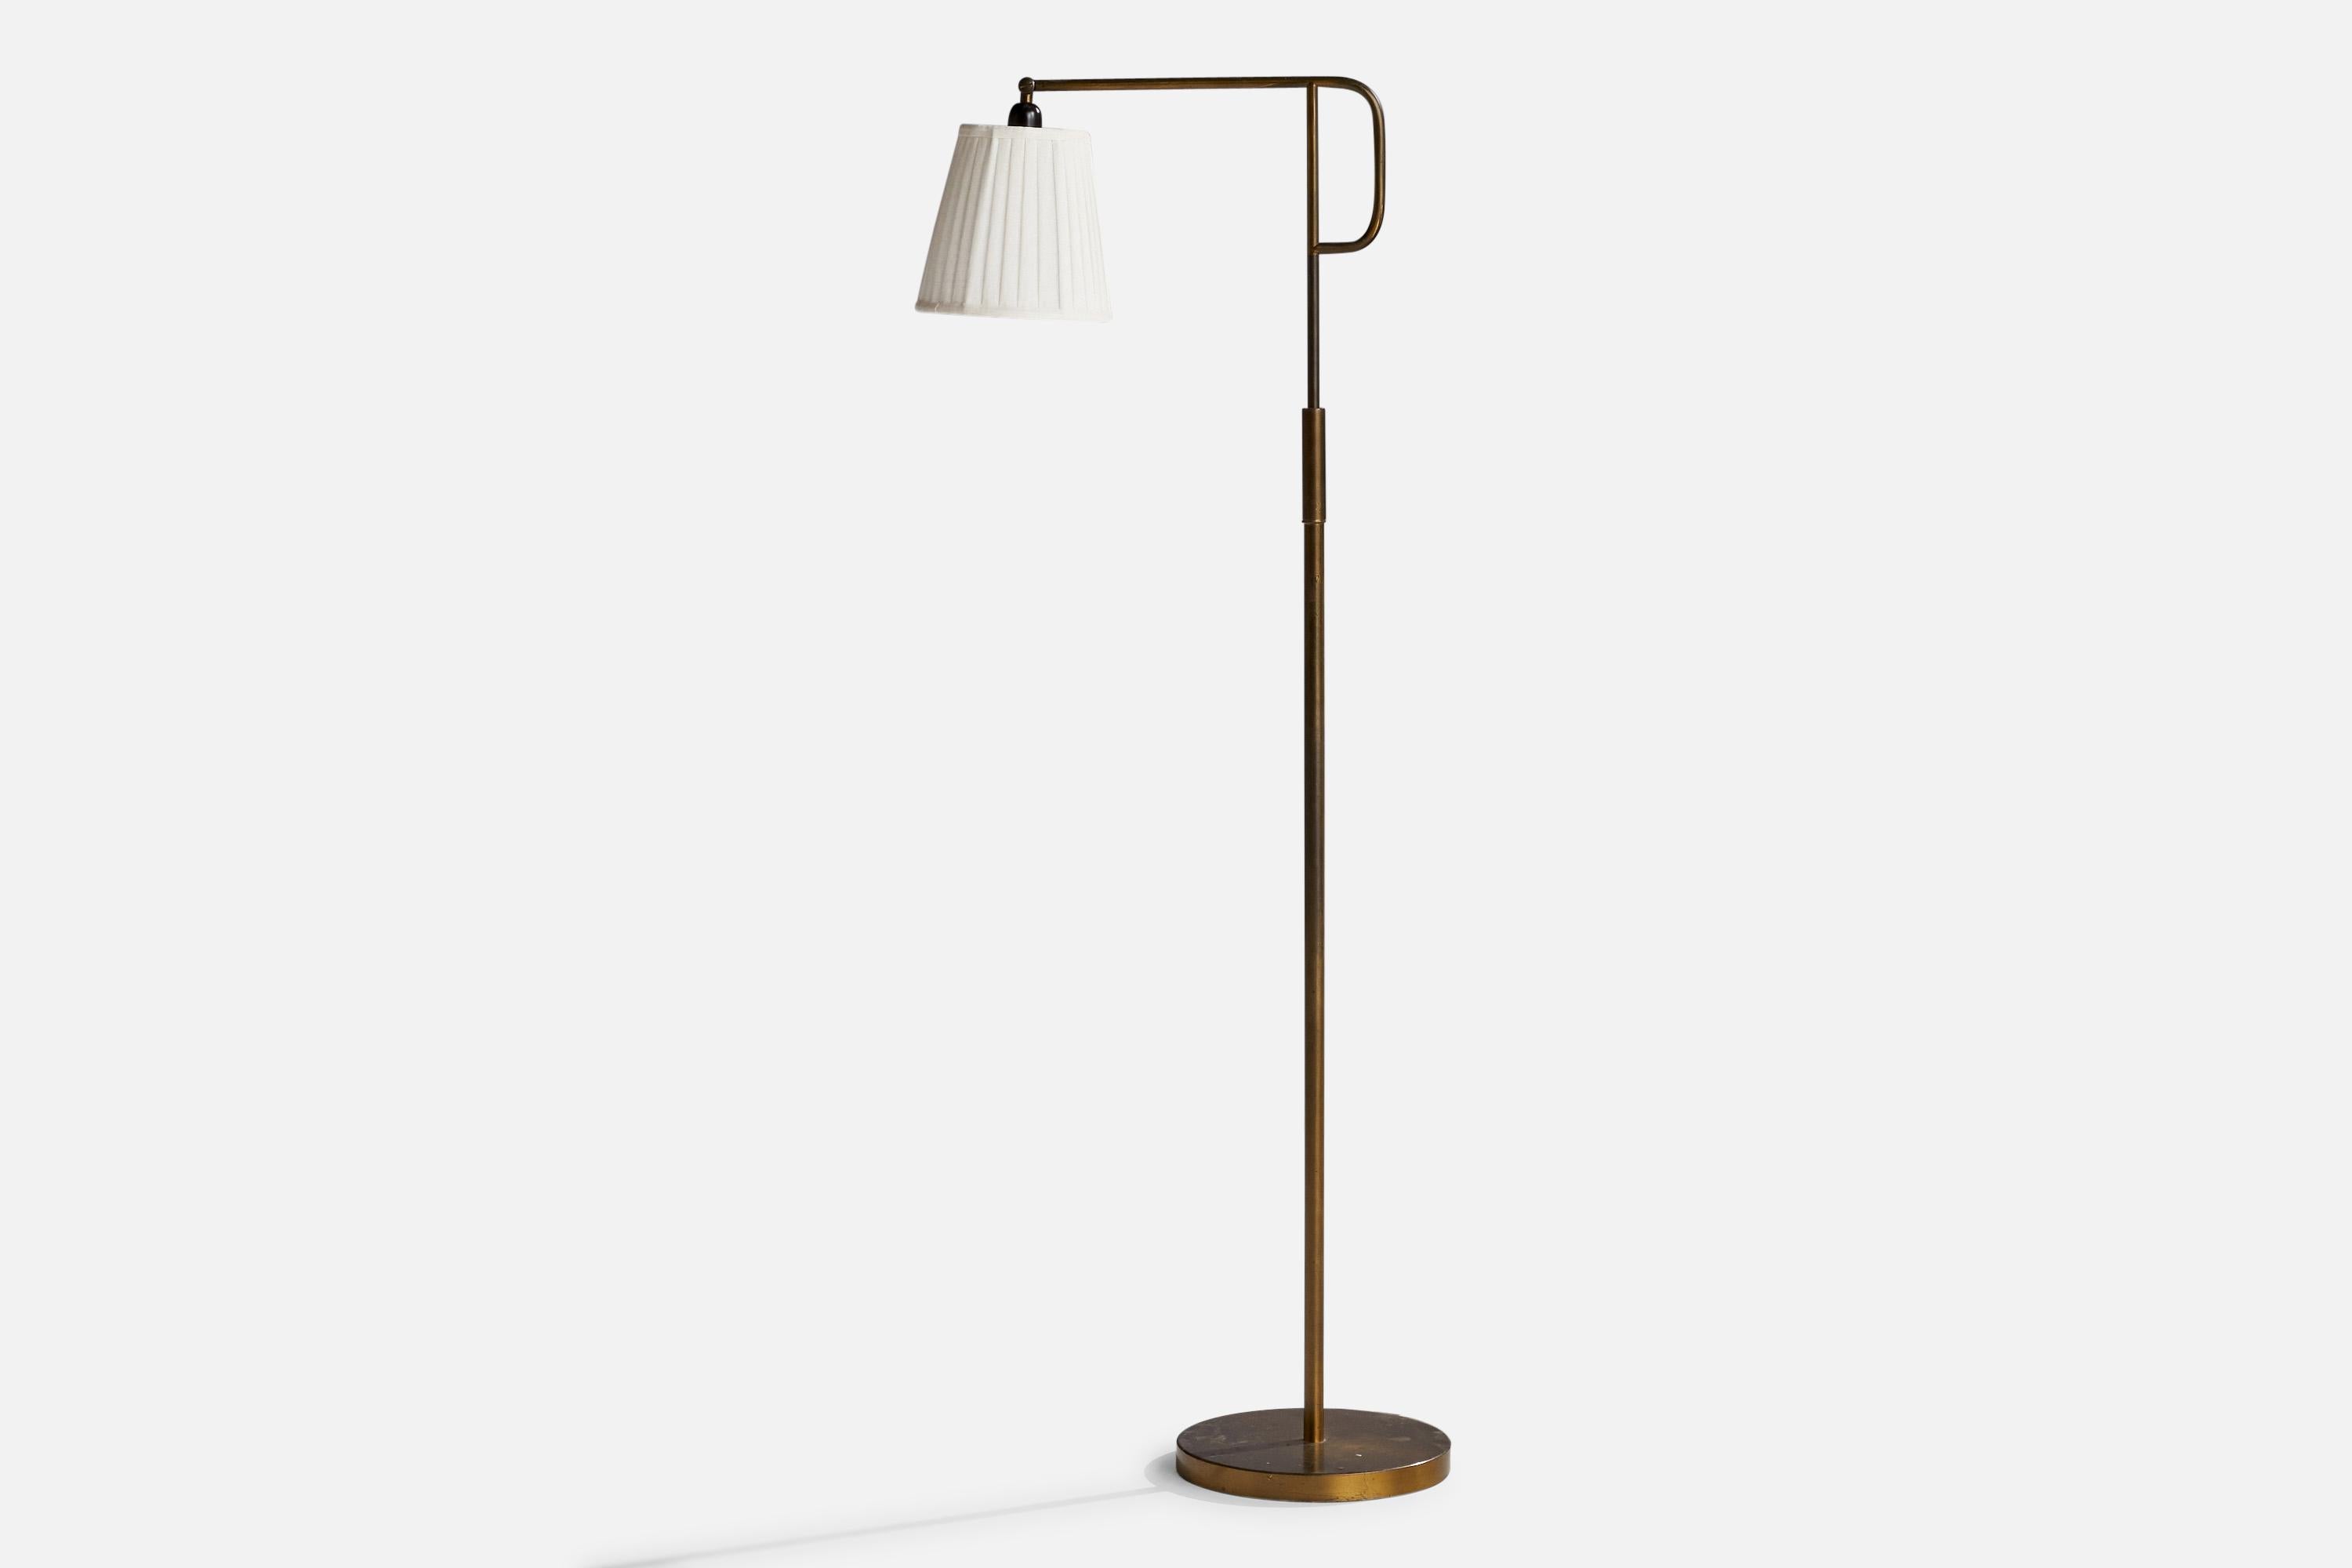 An adjustable brass and white fabric floor lamp designed and produced in Sweden, 1940s.

Dimensions will vary depending upon adjustment.
Overall Dimensions (inches): 63” H x 8”  W x 20”  D
Stated dimensions include shade.
Bulb Specifications: E-26